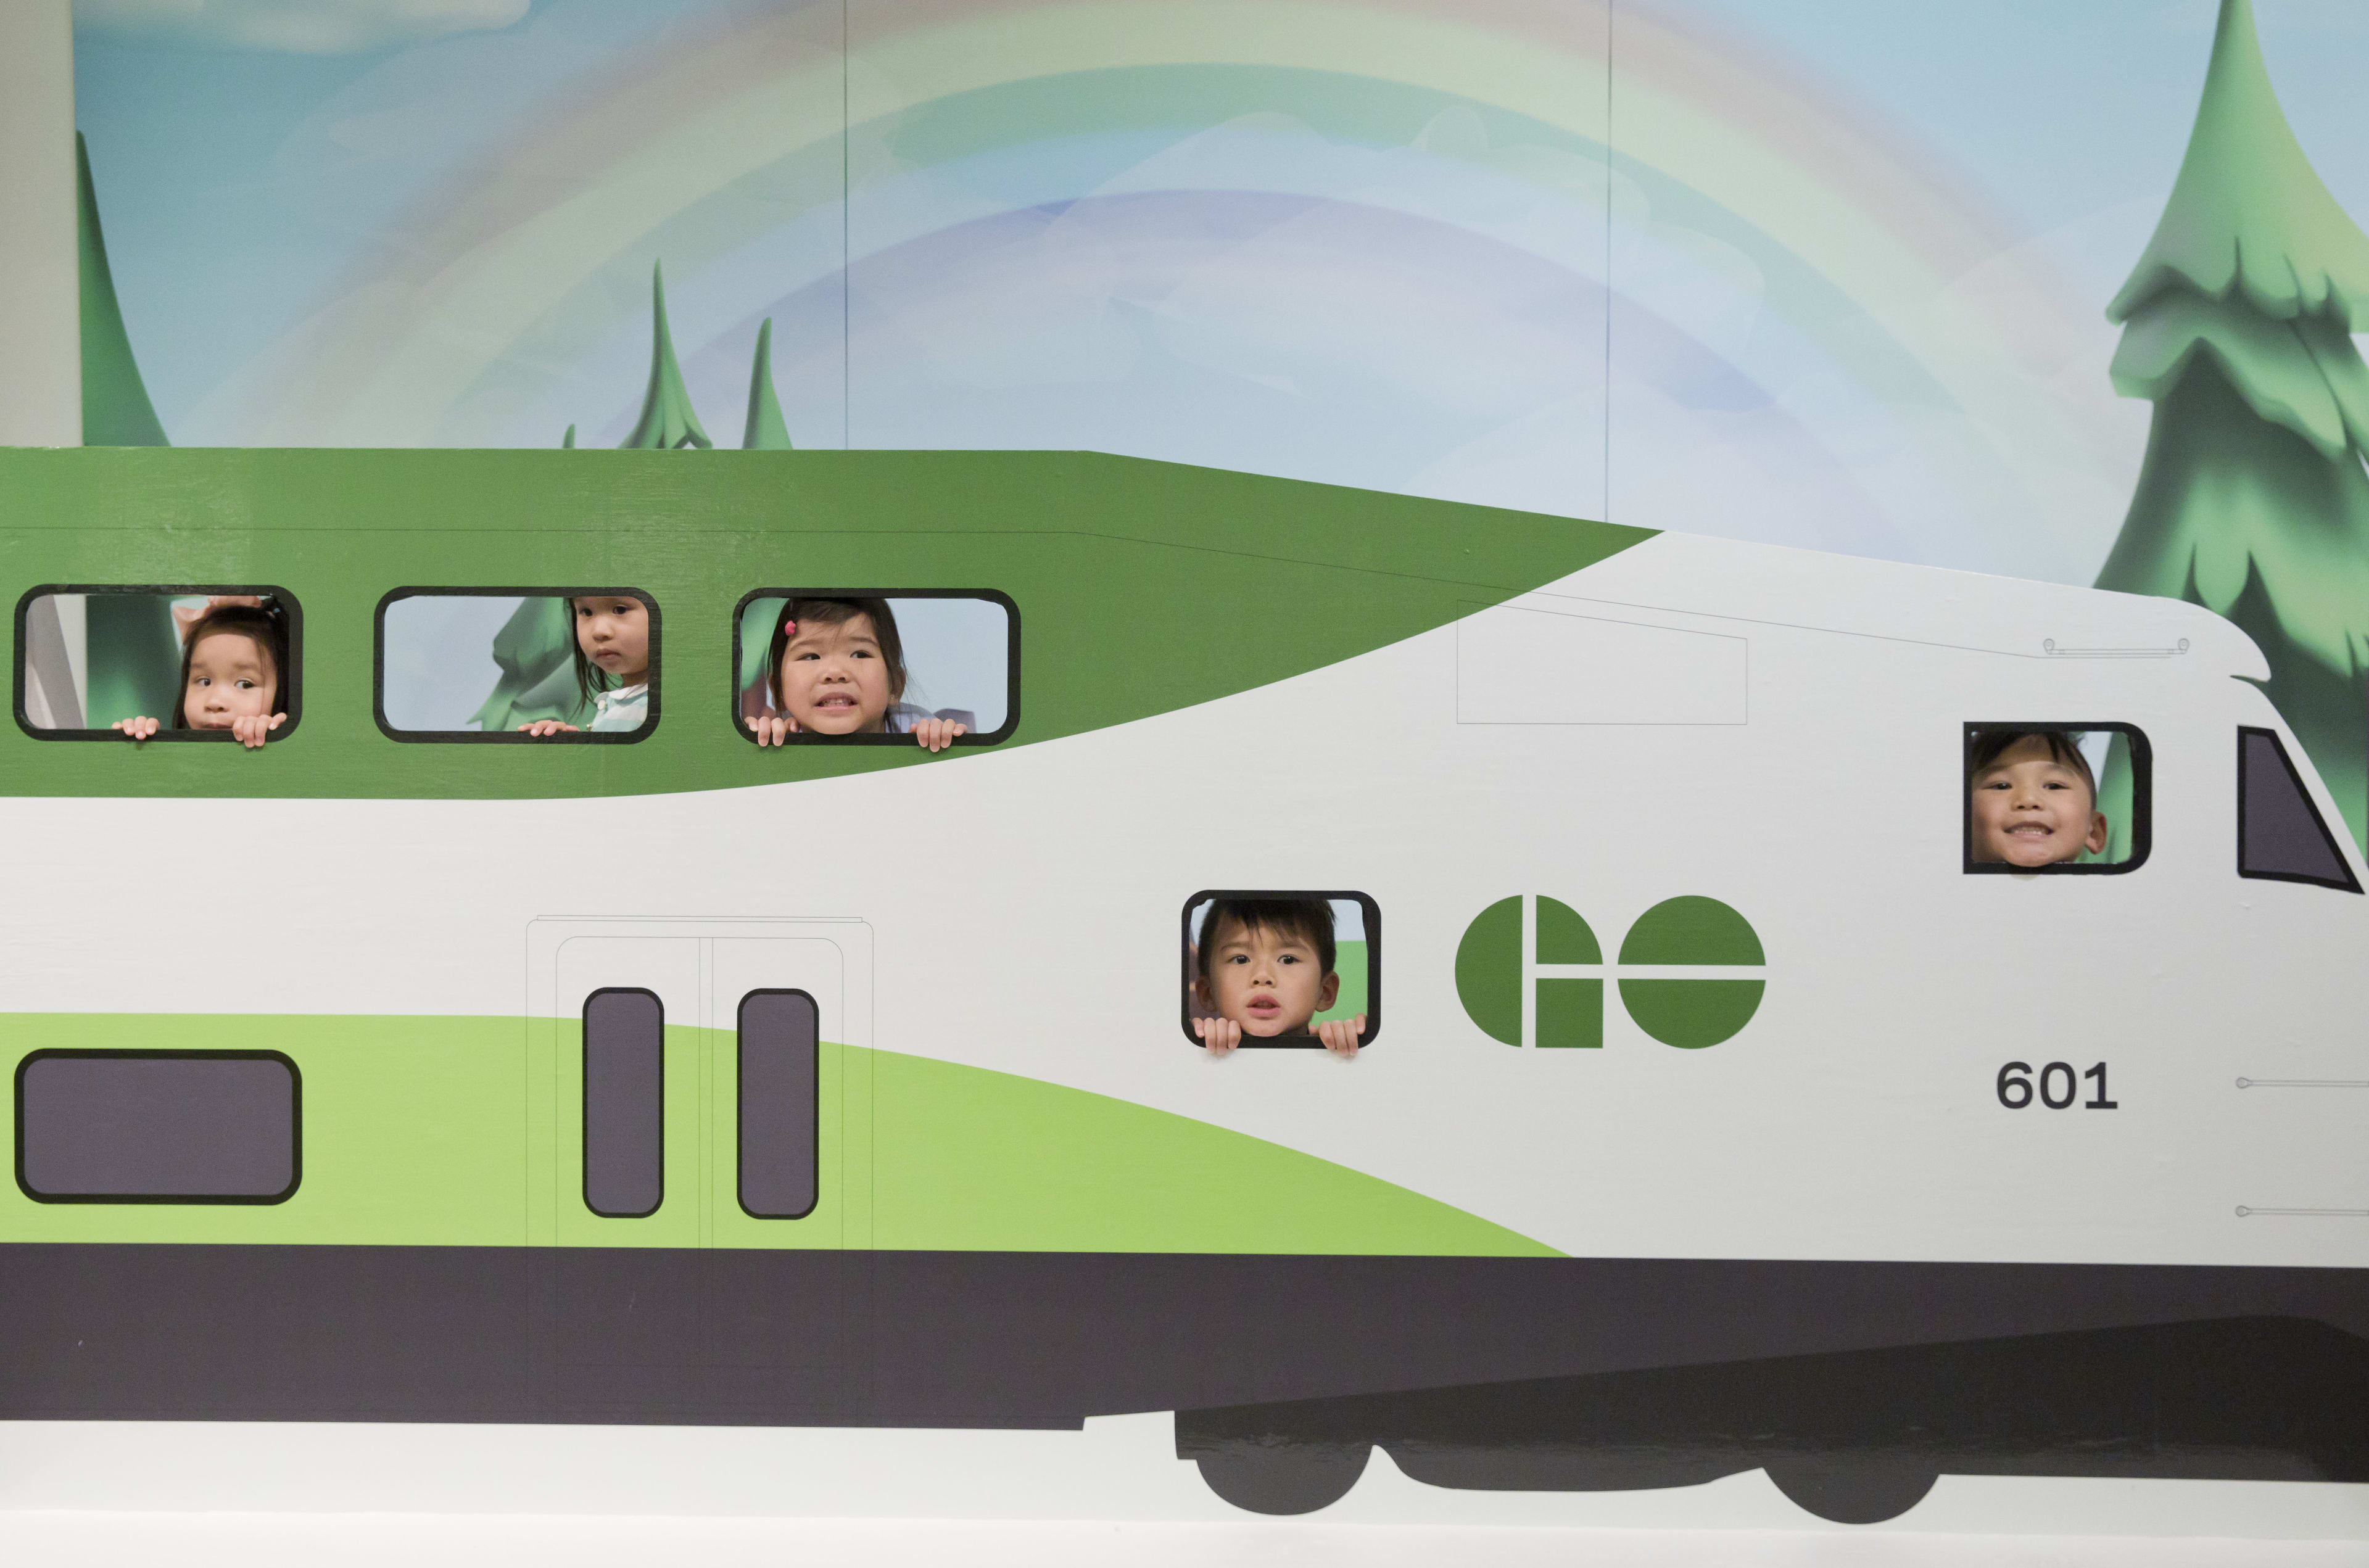 Children's faces are seen looking out of the windows of a small GO train display.